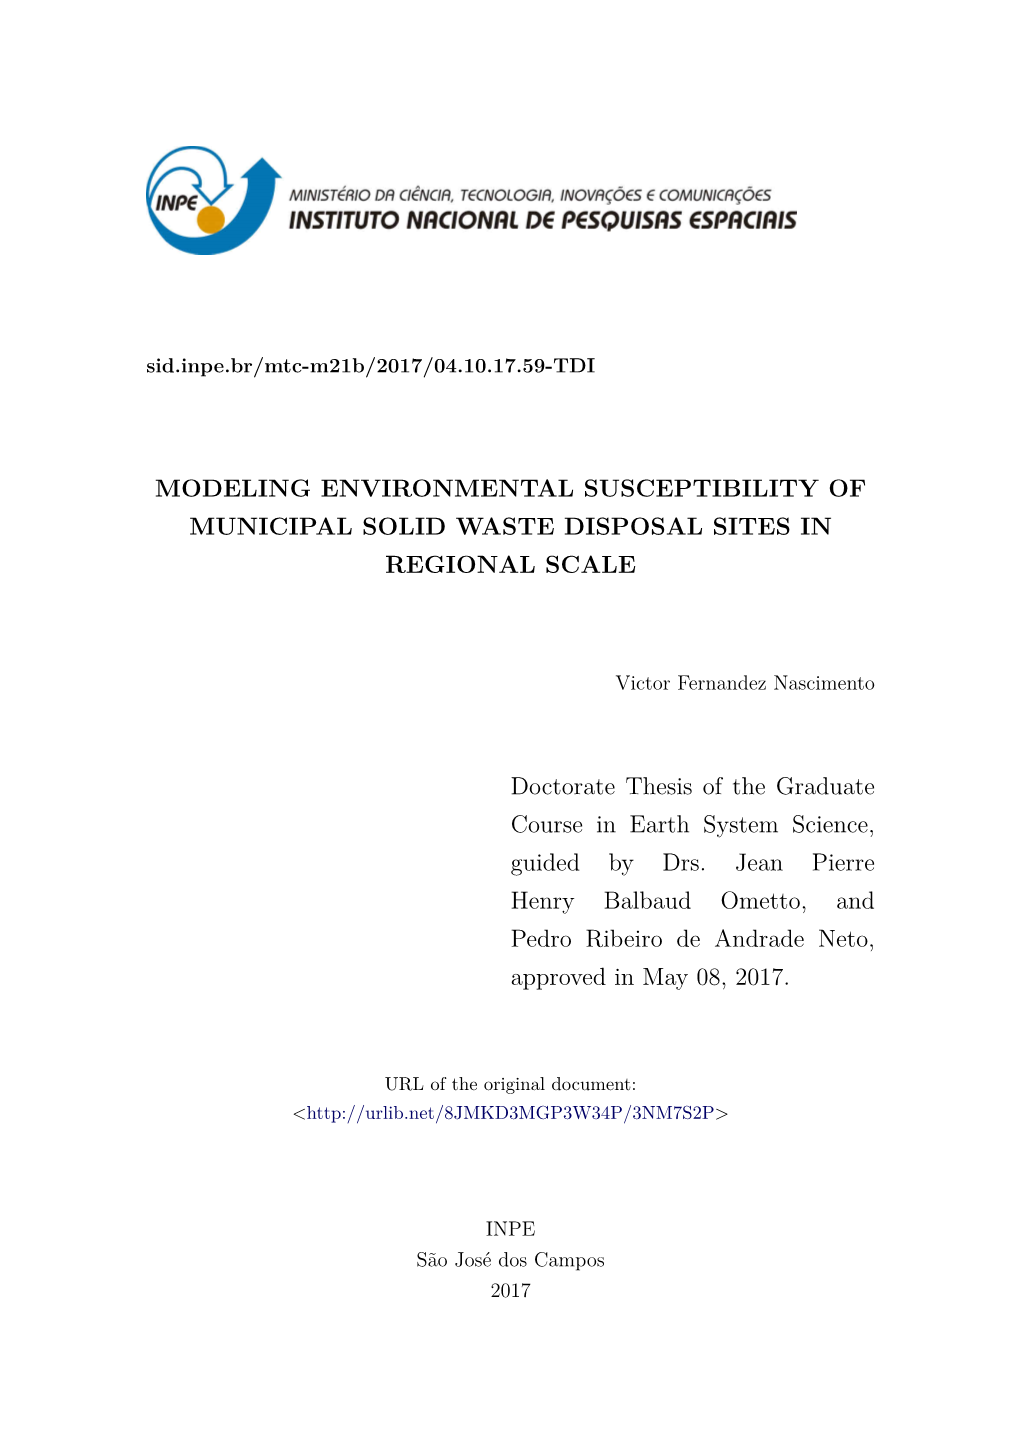 Modeling Environmental Susceptibility of Municipal Solid Waste Disposal Sites in Regional Scale